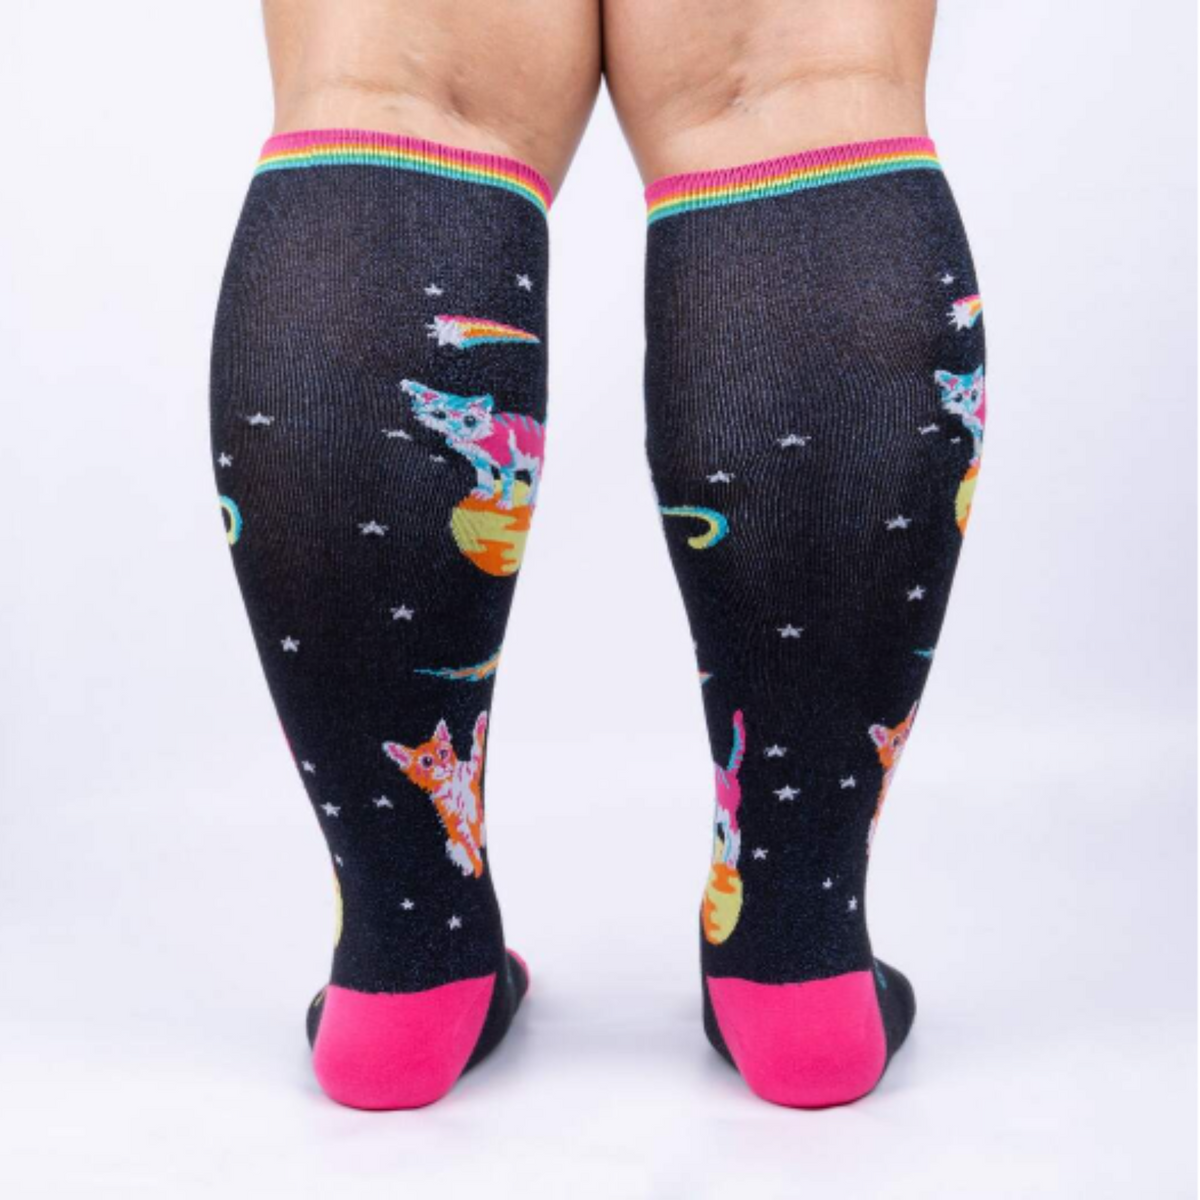 Sock It To Me Space Cats extra-stretchy knee sock featuring pink toe and heel with shimmery black background and kittens in outer space. Socks worn by model seen from back.. 